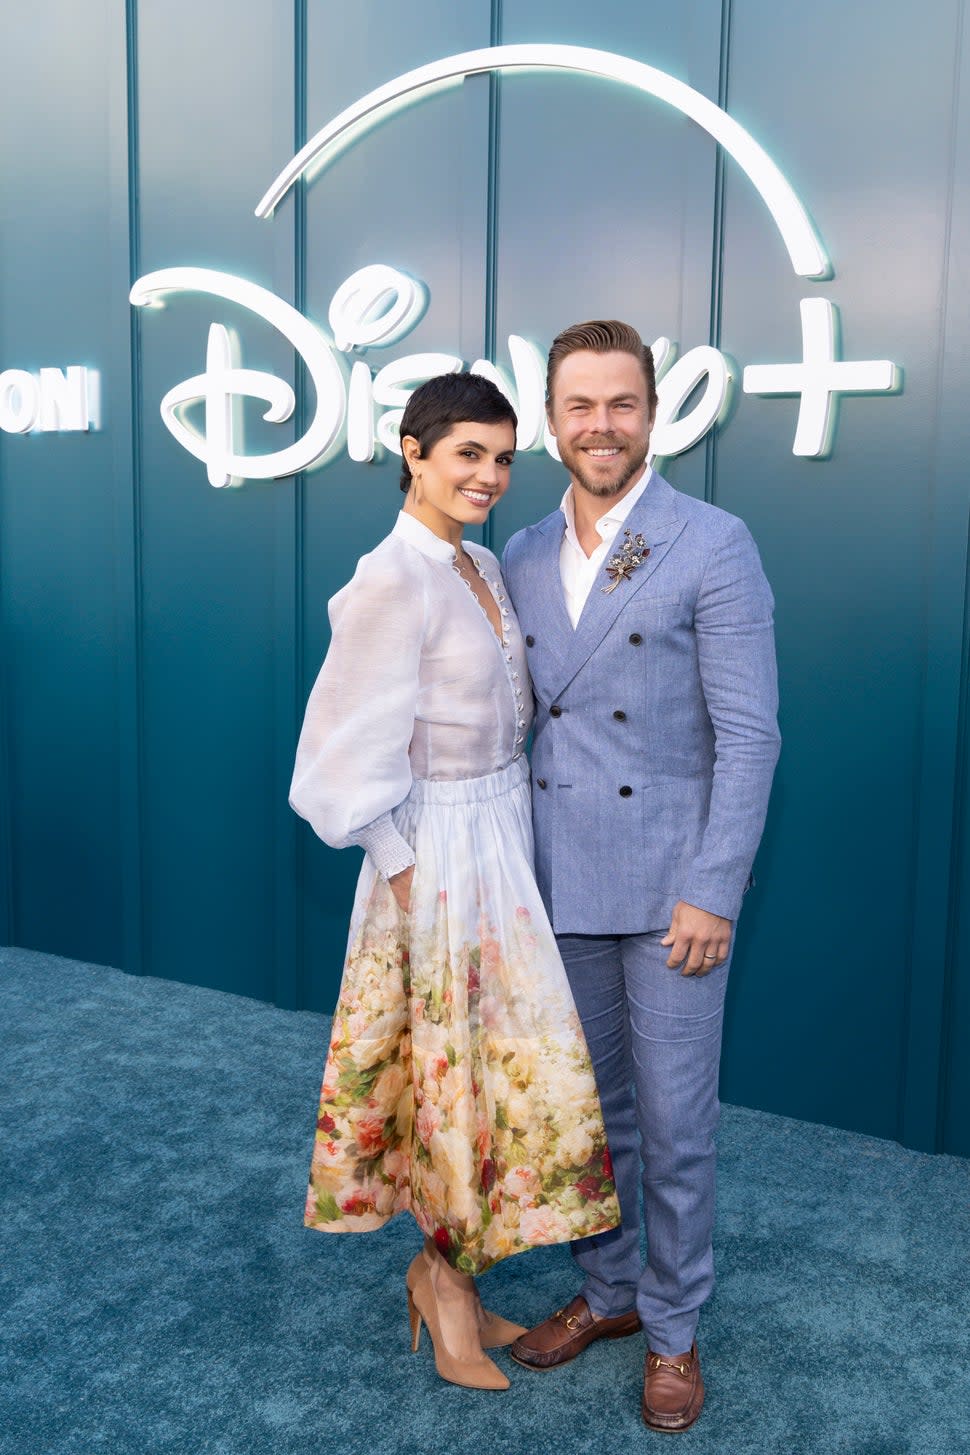  Some of the biggest stars across The Walt Disney Company celebrate the official launch of Hulu on Disney+ at an exclusive cocktail reception hosted by Dana Walden and Alan Bergman, along with special guest Bob Iger, on Friday evening in Los Angeles. HAYLEY HOUGH, DEREK HOUGH